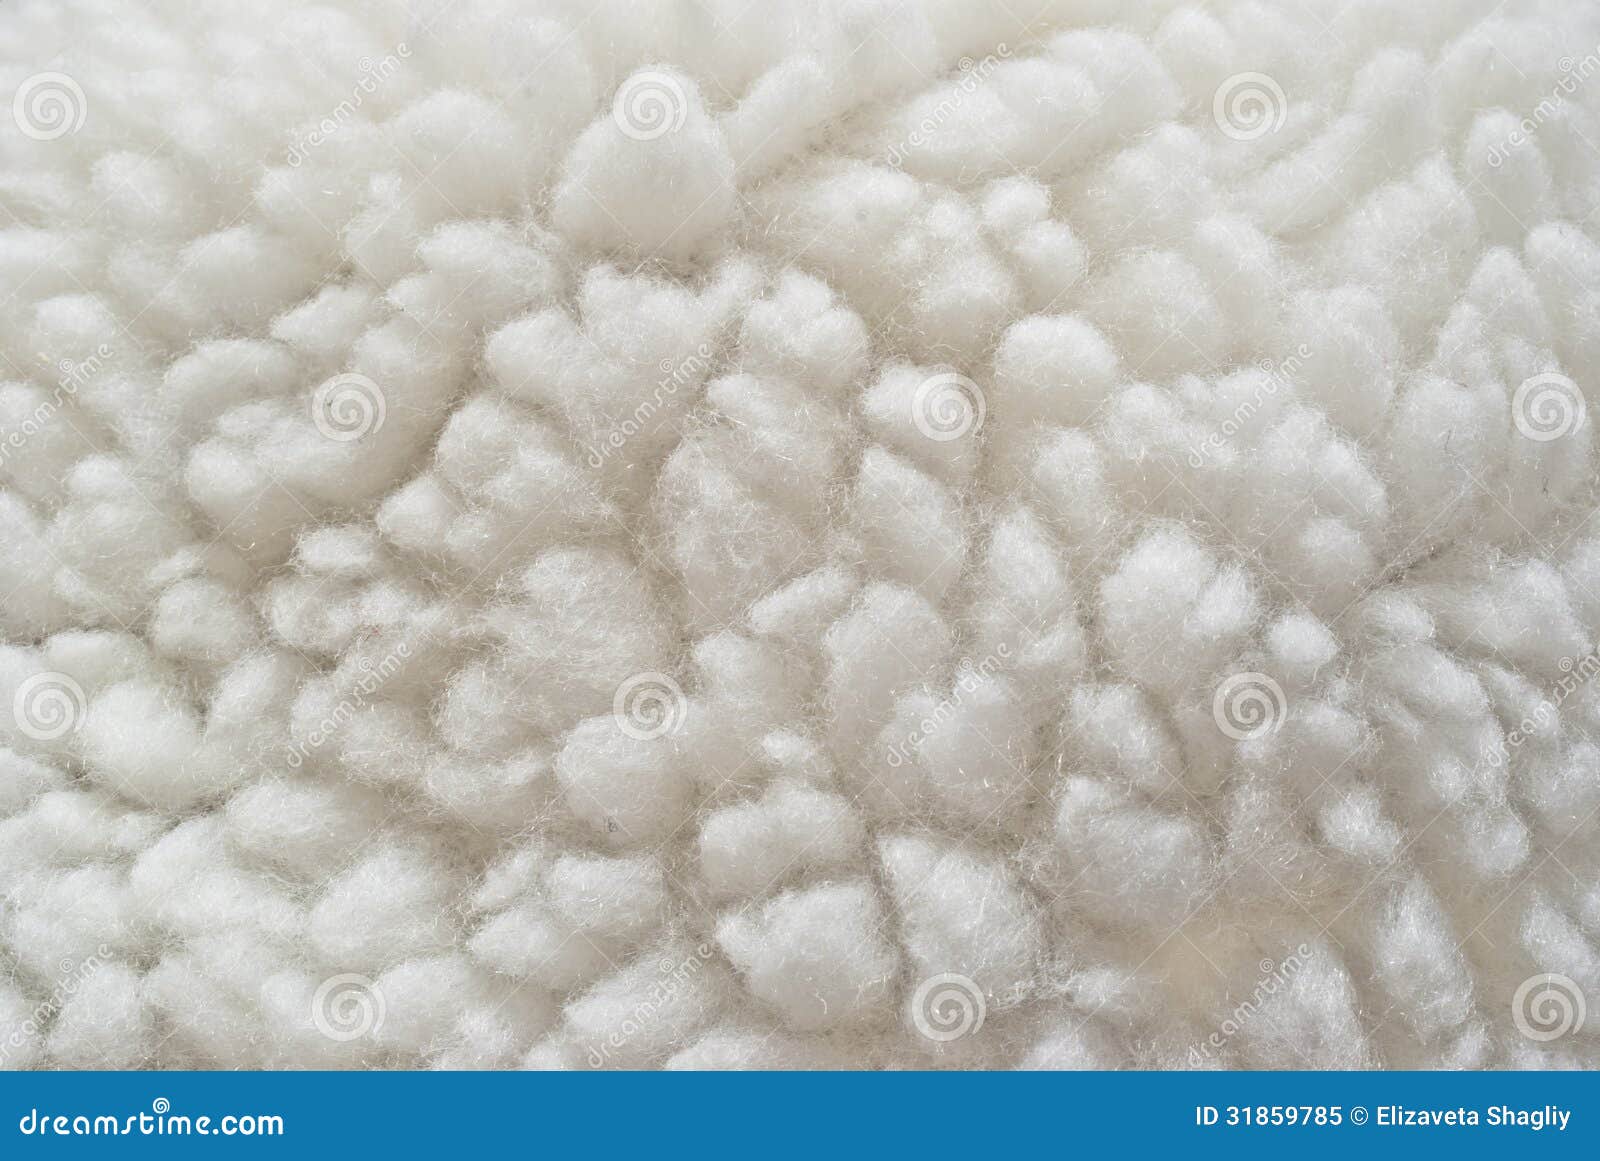 abstract-wool-texture-may-be-used-as-background-31859785.jpg